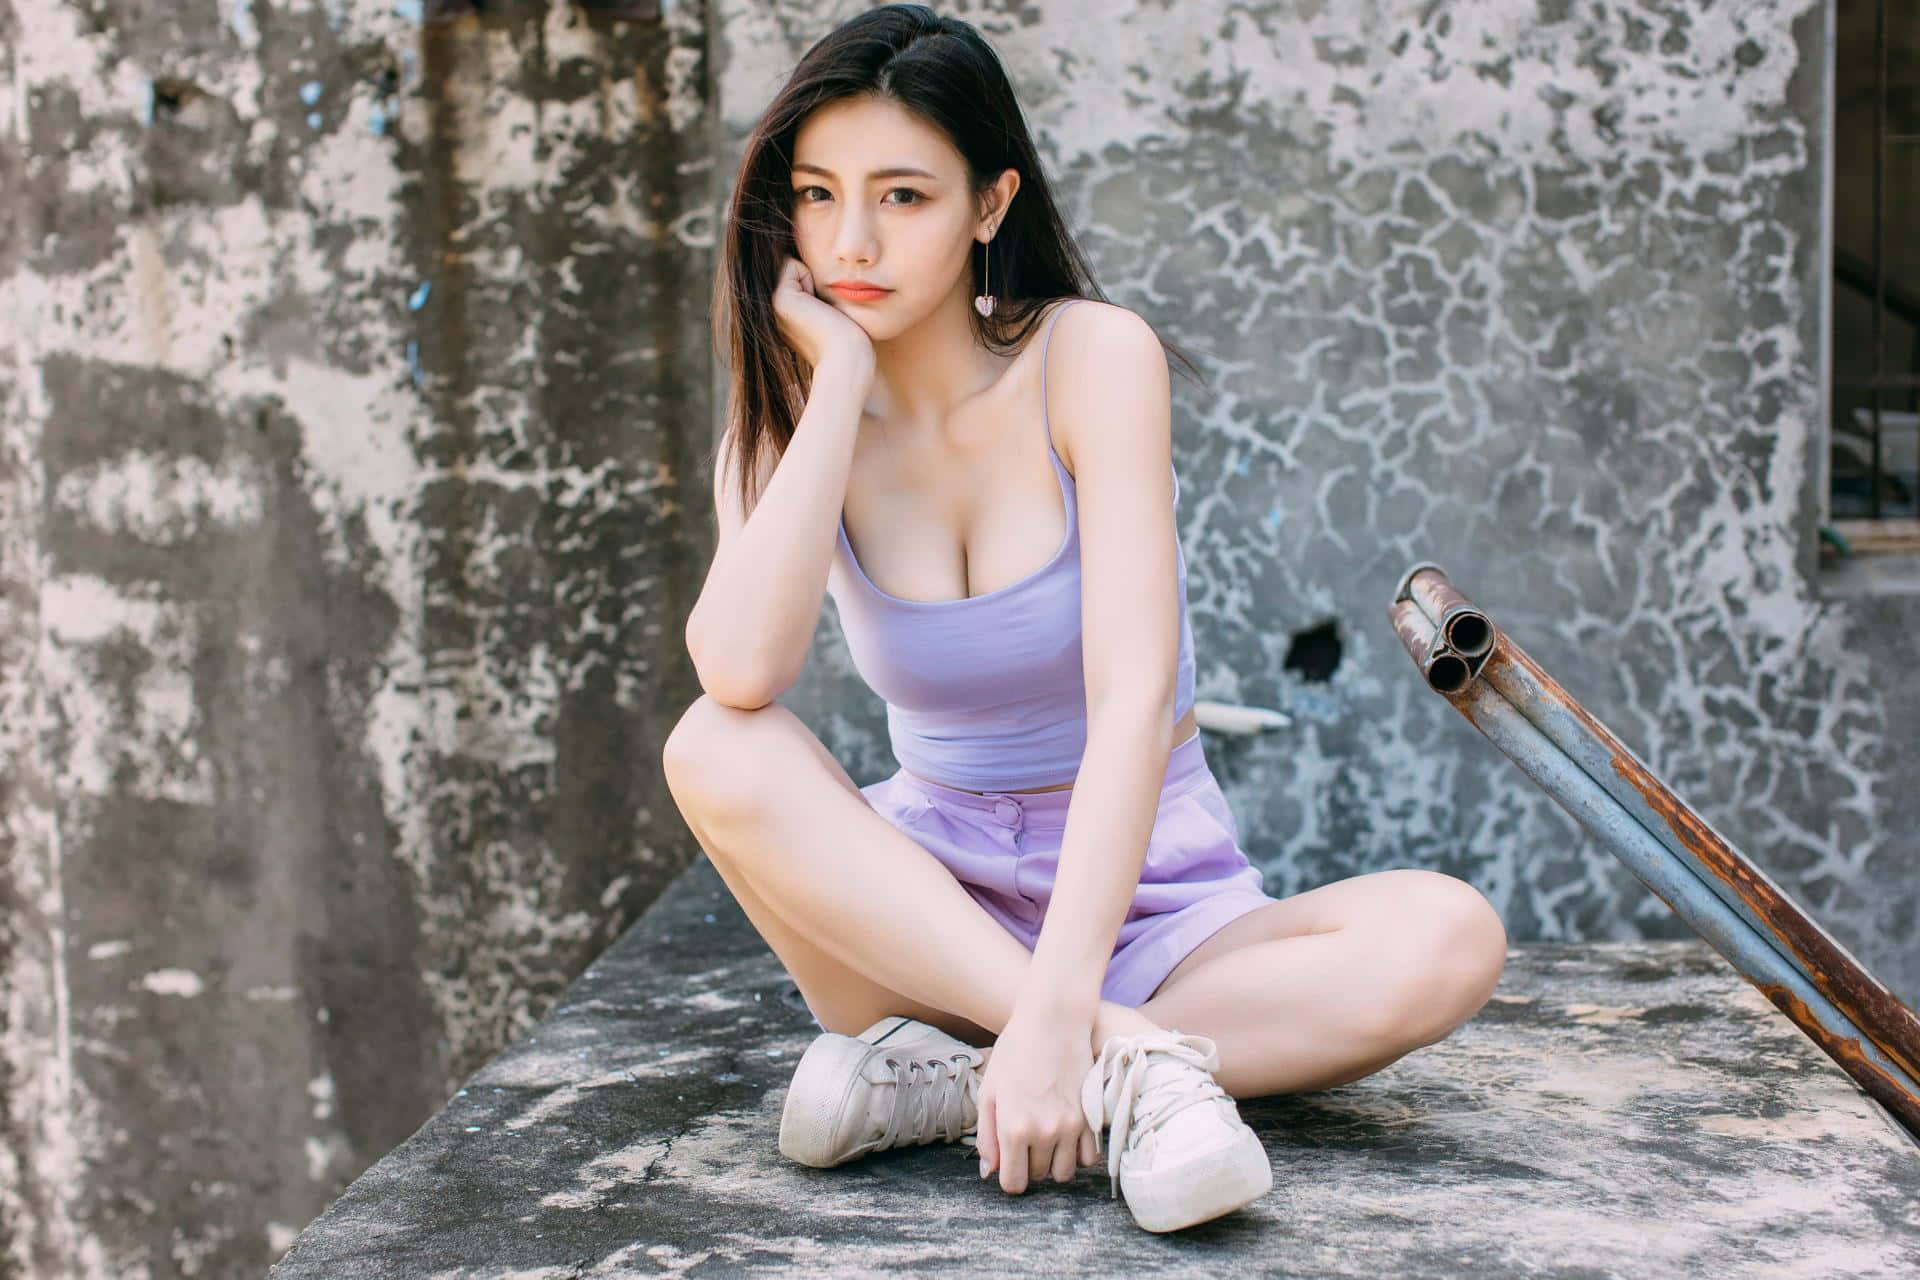 Captivating Thai Girl in Lavender Outfit Wallpaper